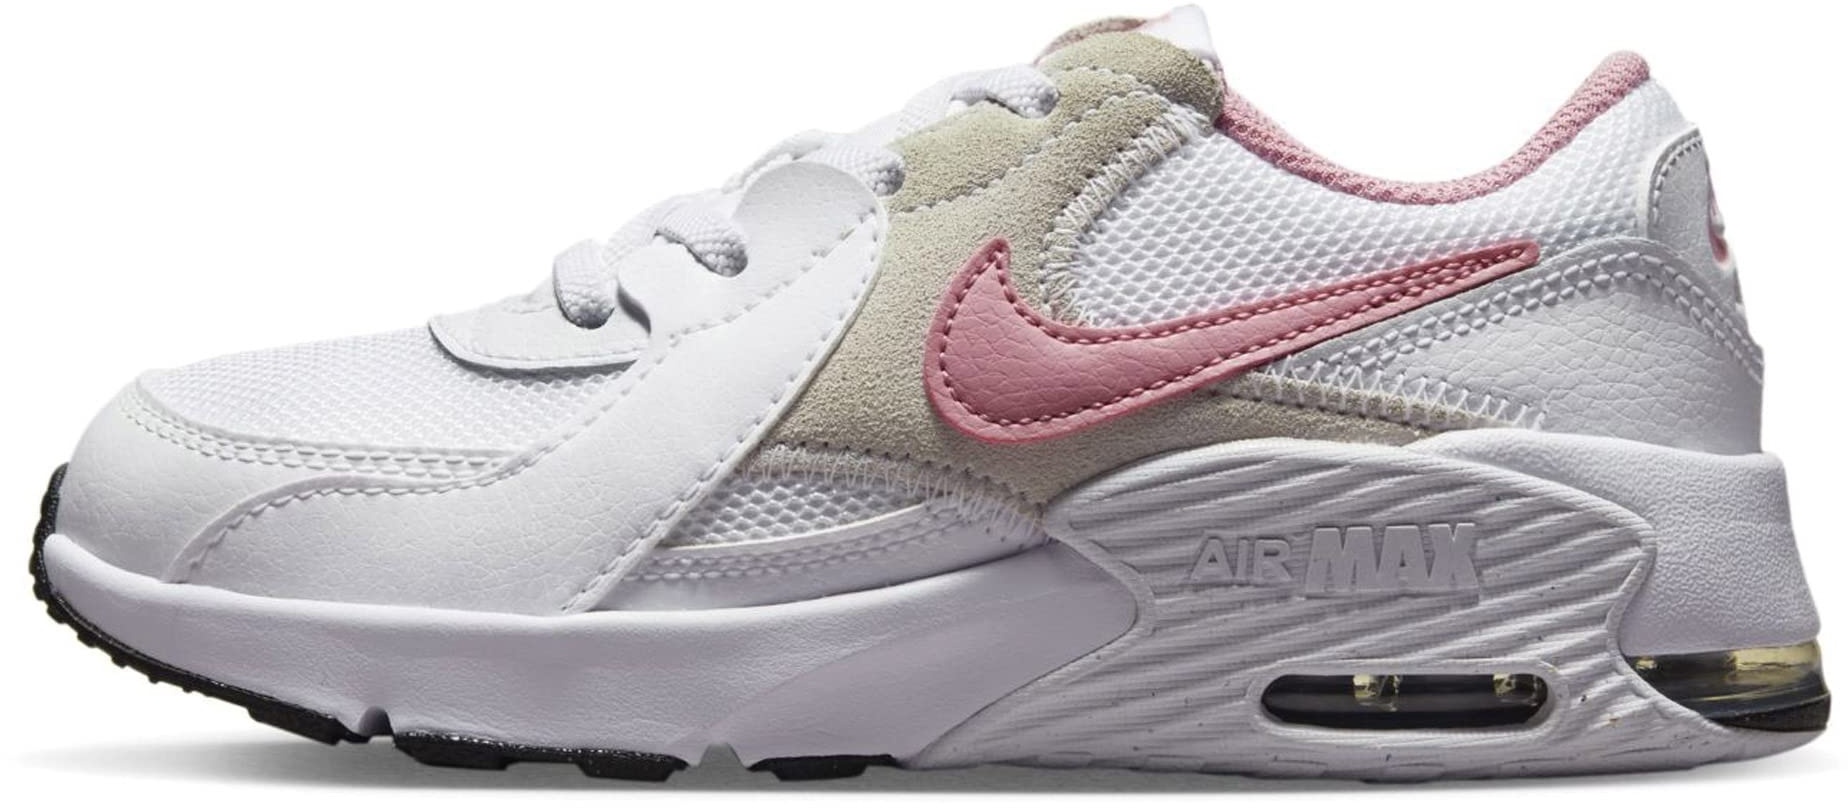 Nike Air Max Excee Sneaker, White/Elemental PINK-MED Soft PINK-White, 22 EU